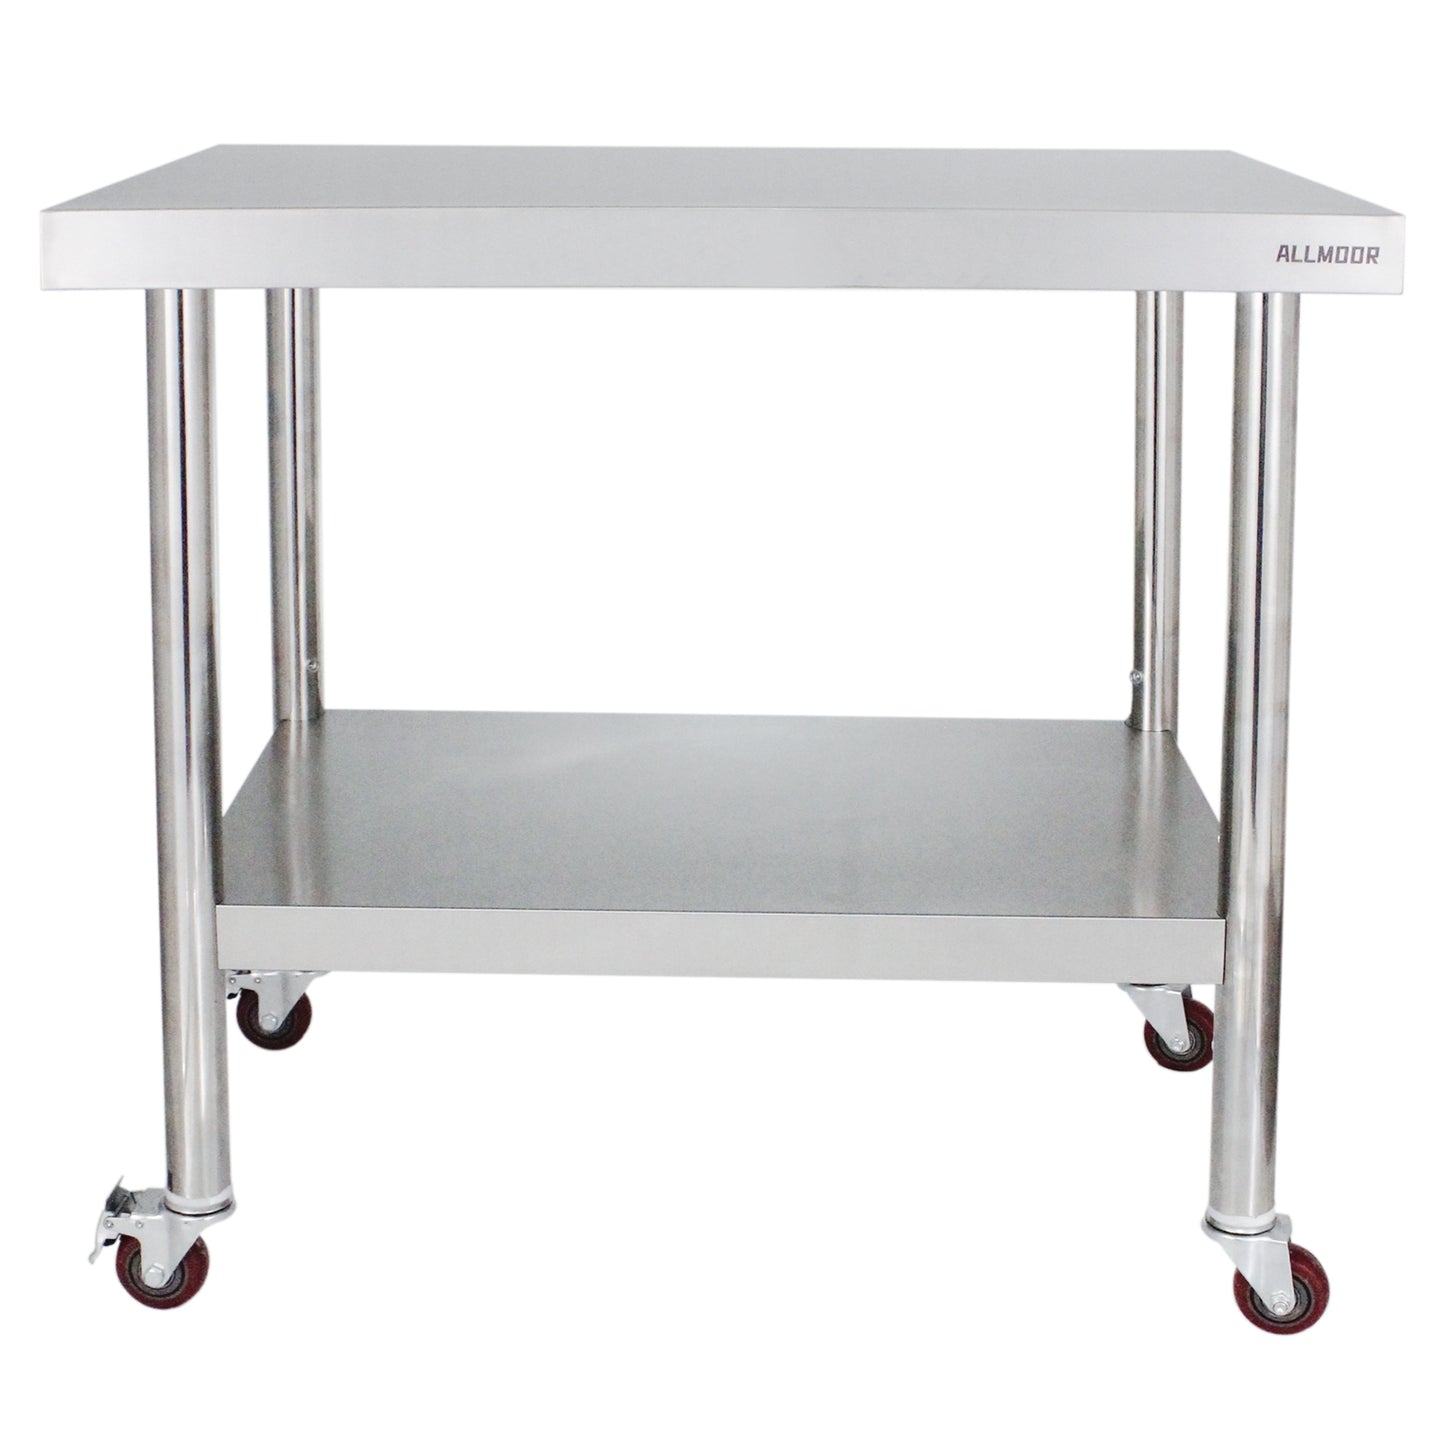 ALLMODR Food Prep Stainless Steel Table 24x36 Inch with 4 Wheels Commercial Food Prep Worktable with Casters Heavy Duty Work Table for Commercial Kitchen Restaurant